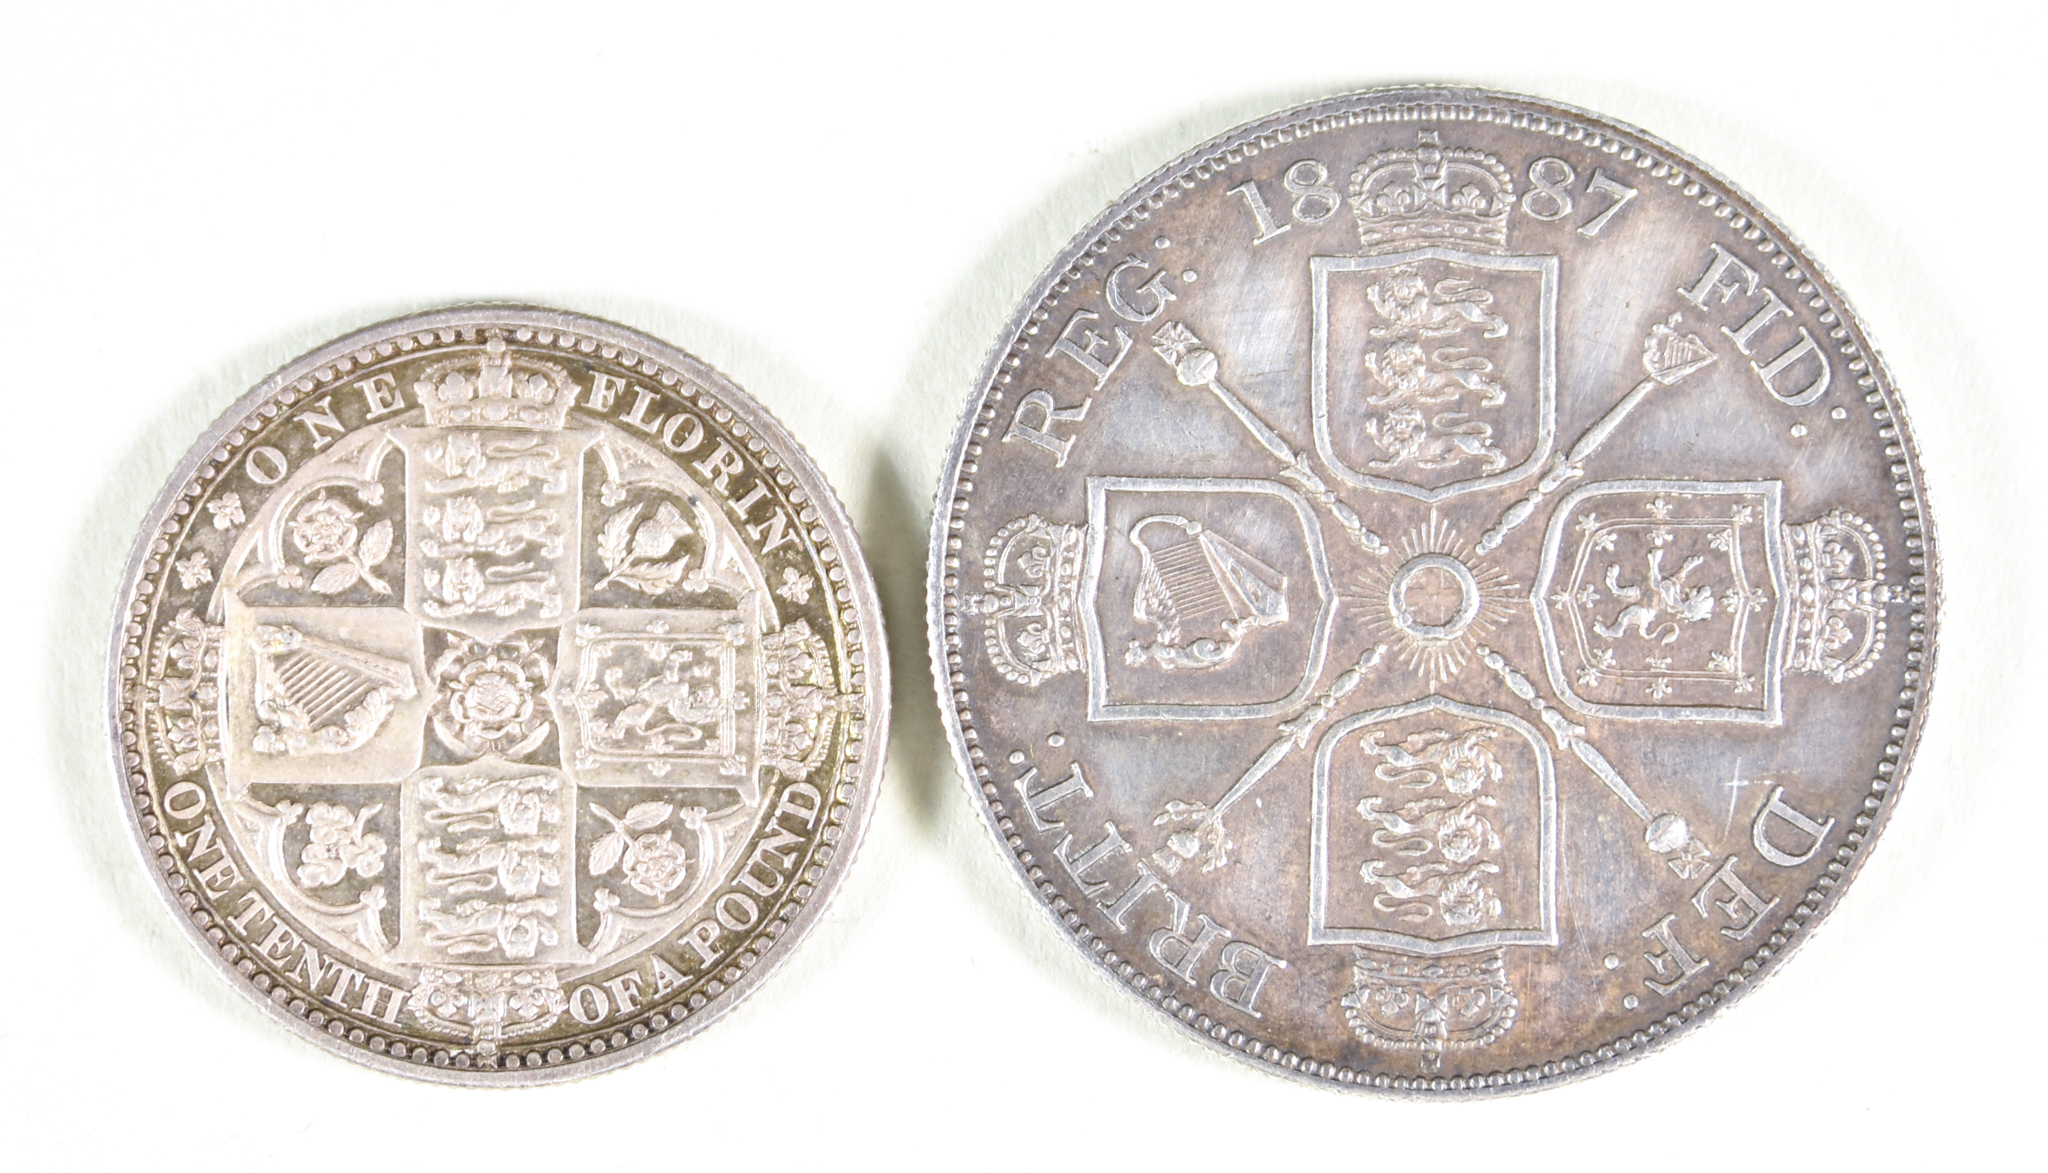 One Victoria Florin, 1849, and one double florin, 1887 - Image 2 of 2